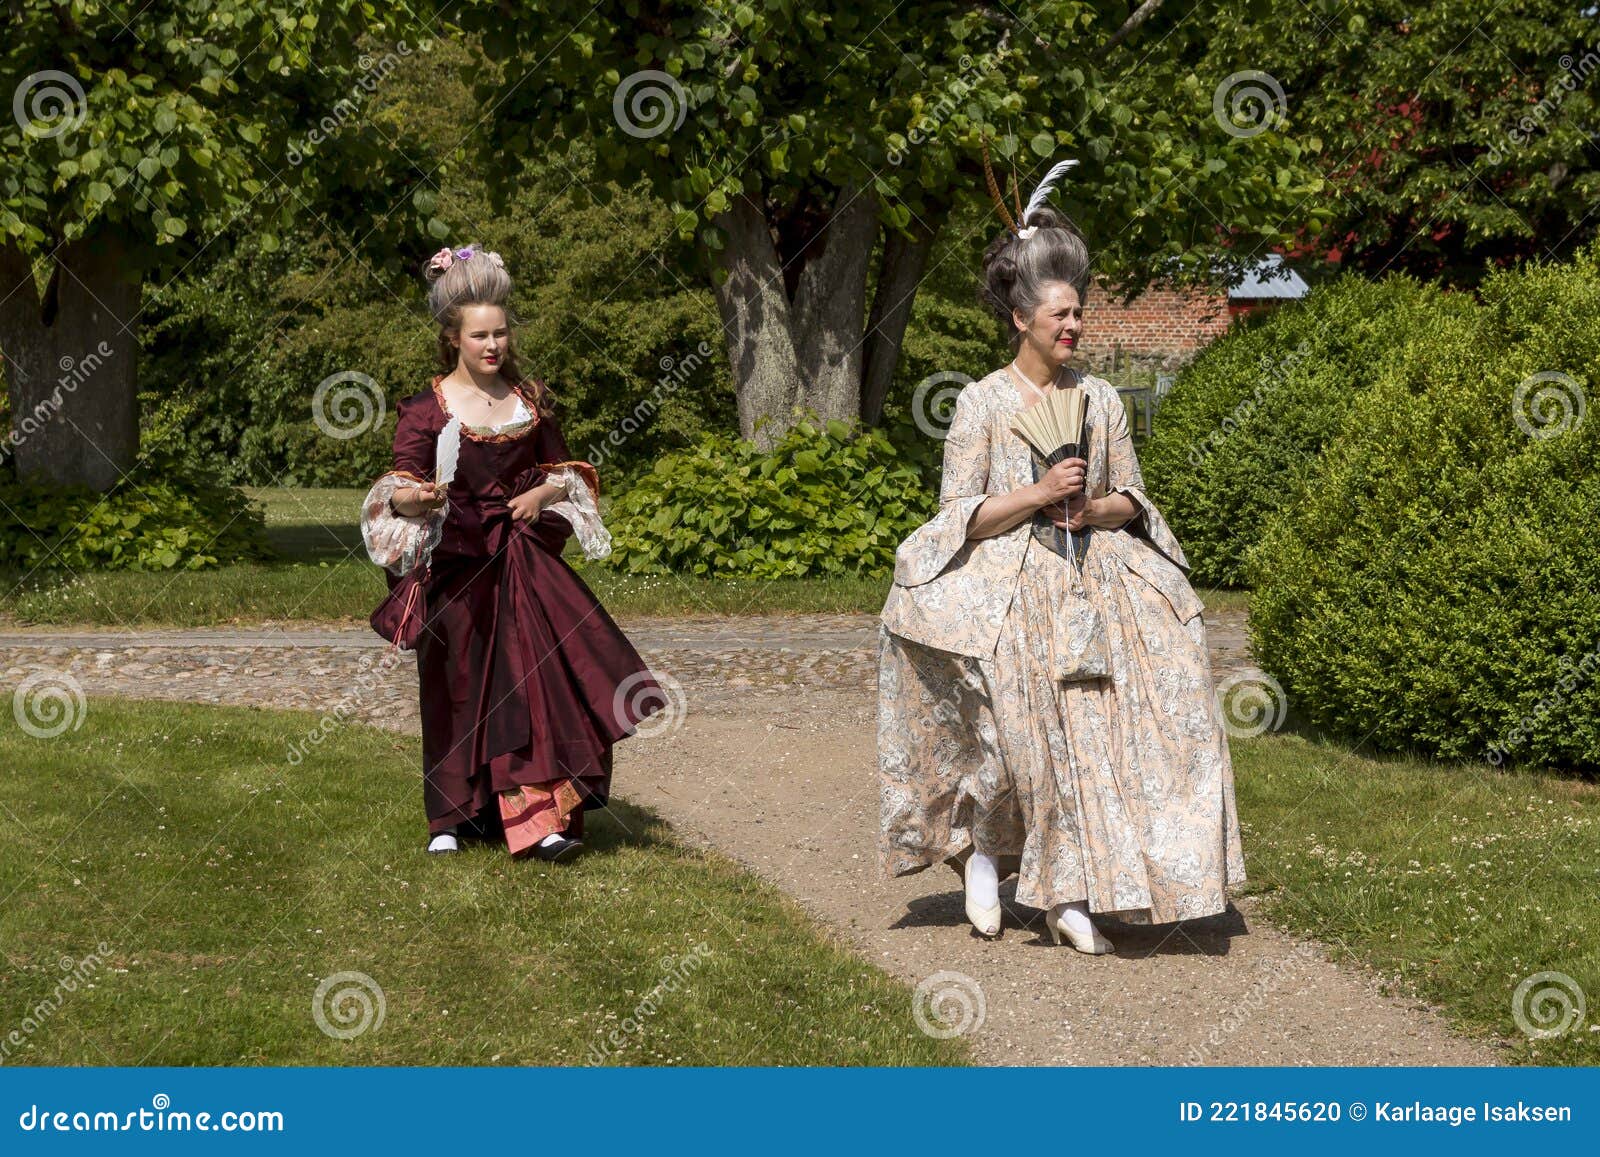 18th Century Day at Gammel Estrup Castle, People are Dressed As in the ...